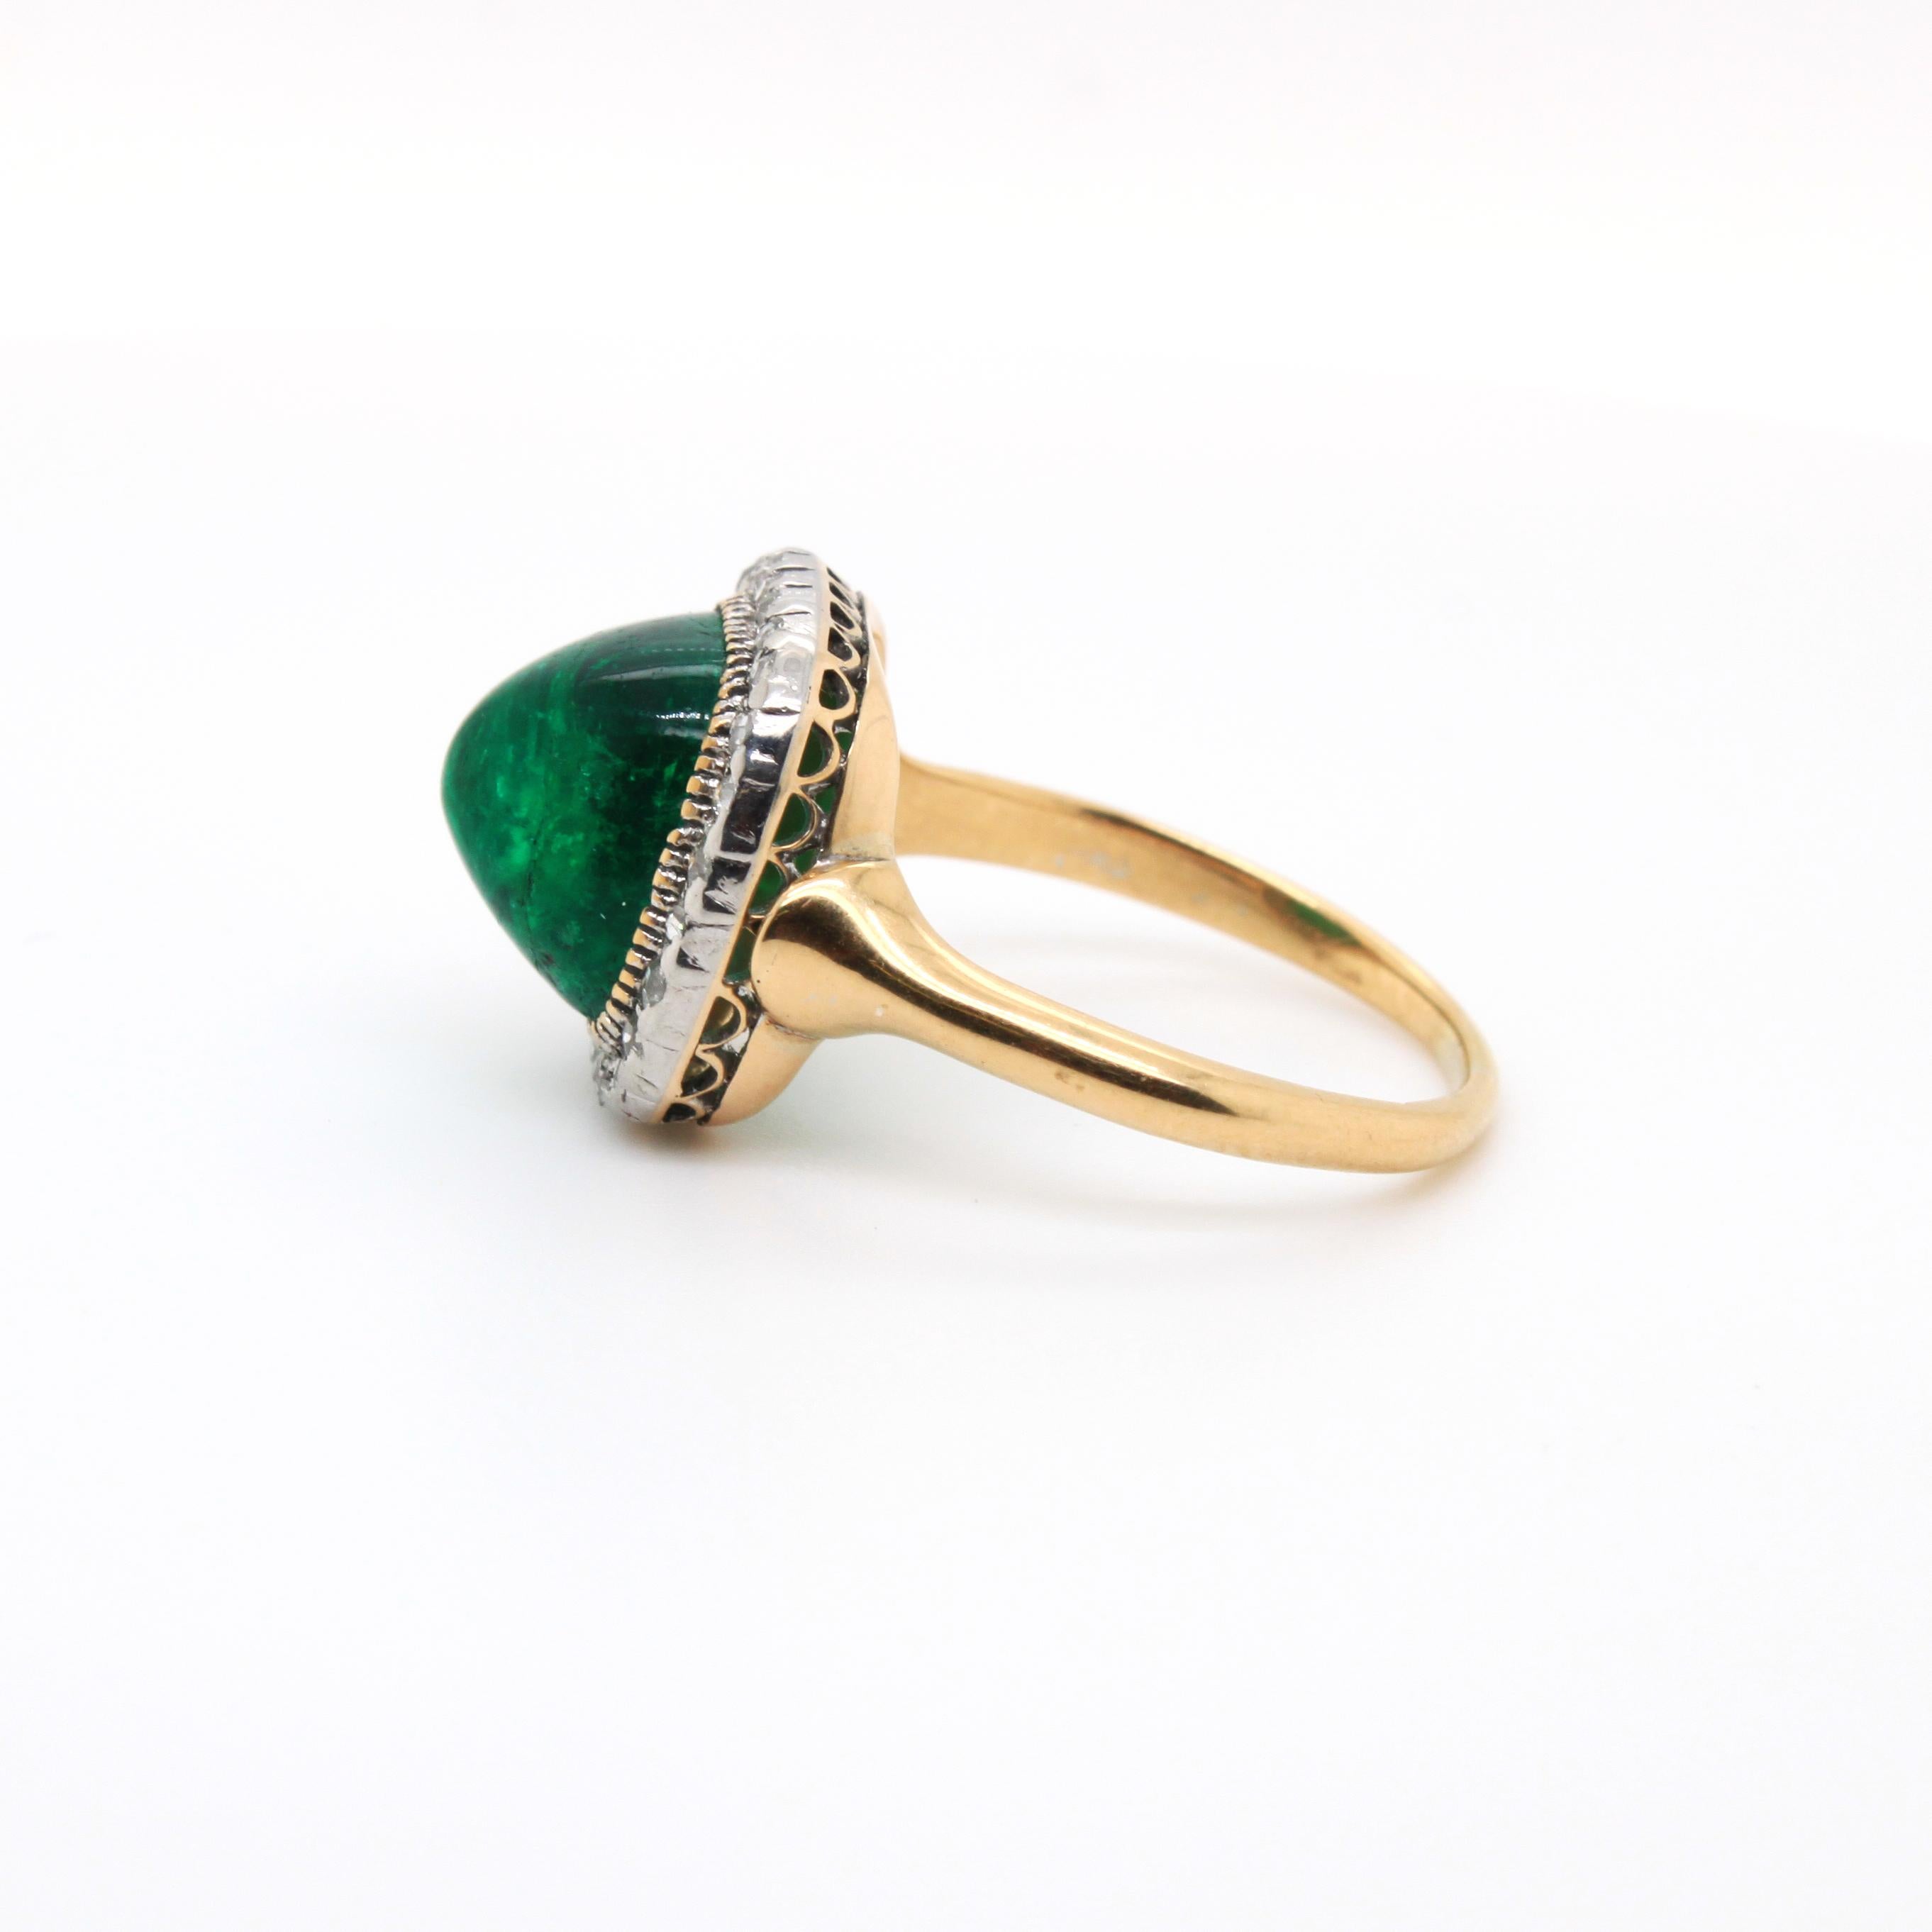 Women's Victorian Colombian Sugarloaf Emerald and Diamond Ring, circa 1890s